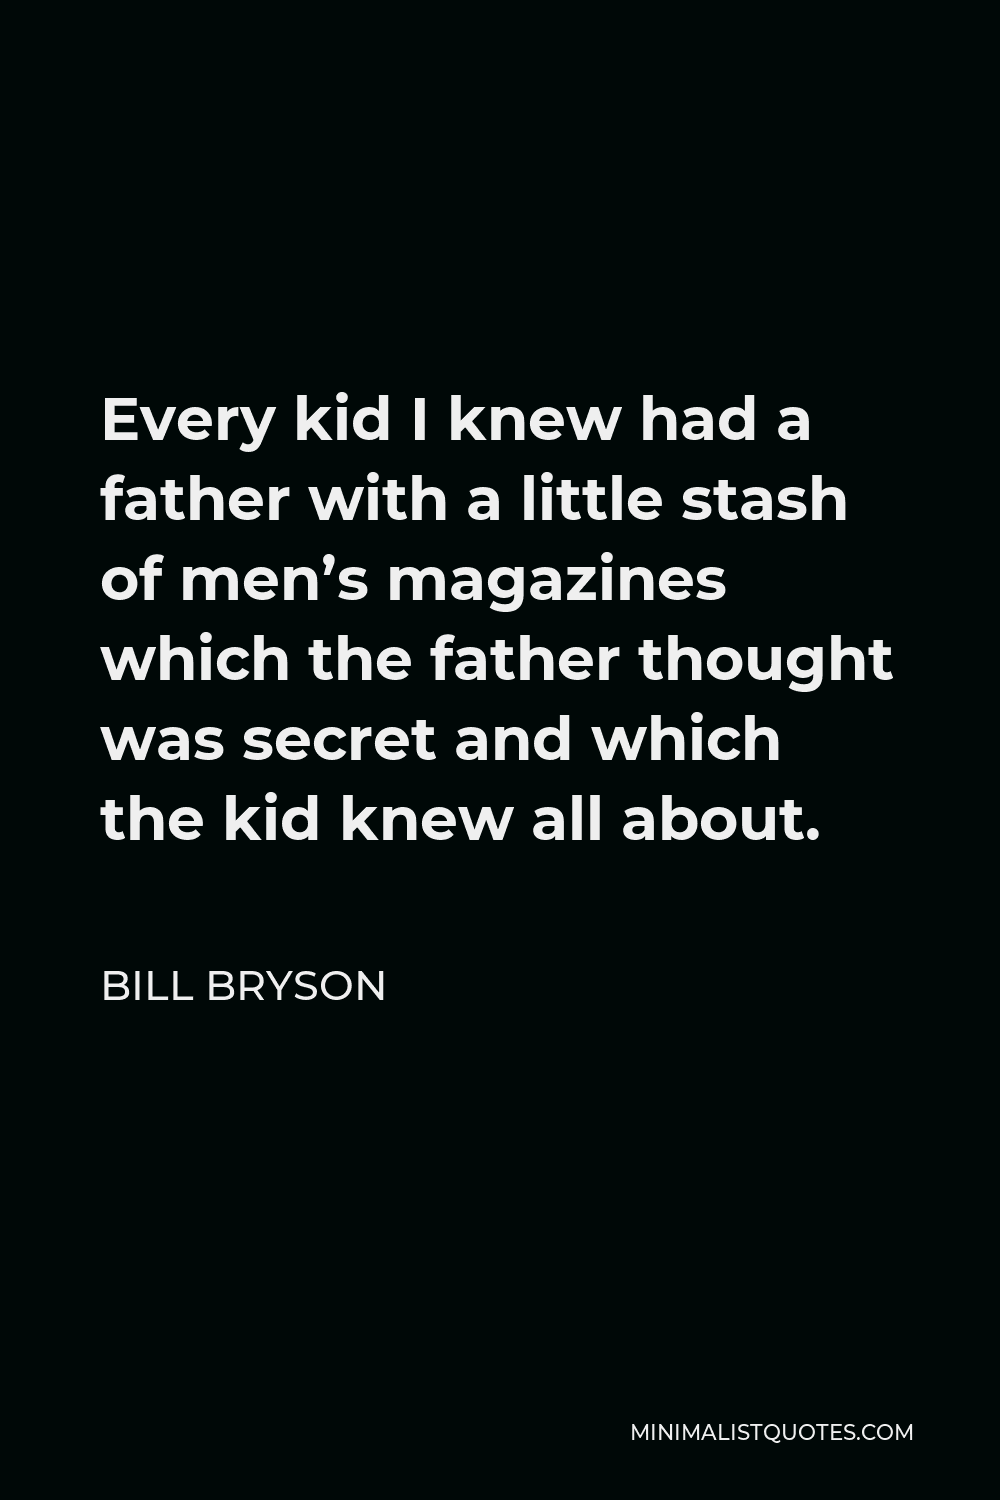 Bill Bryson Quote - Every kid I knew had a father with a little stash of men’s magazines which the father thought was secret and which the kid knew all about.